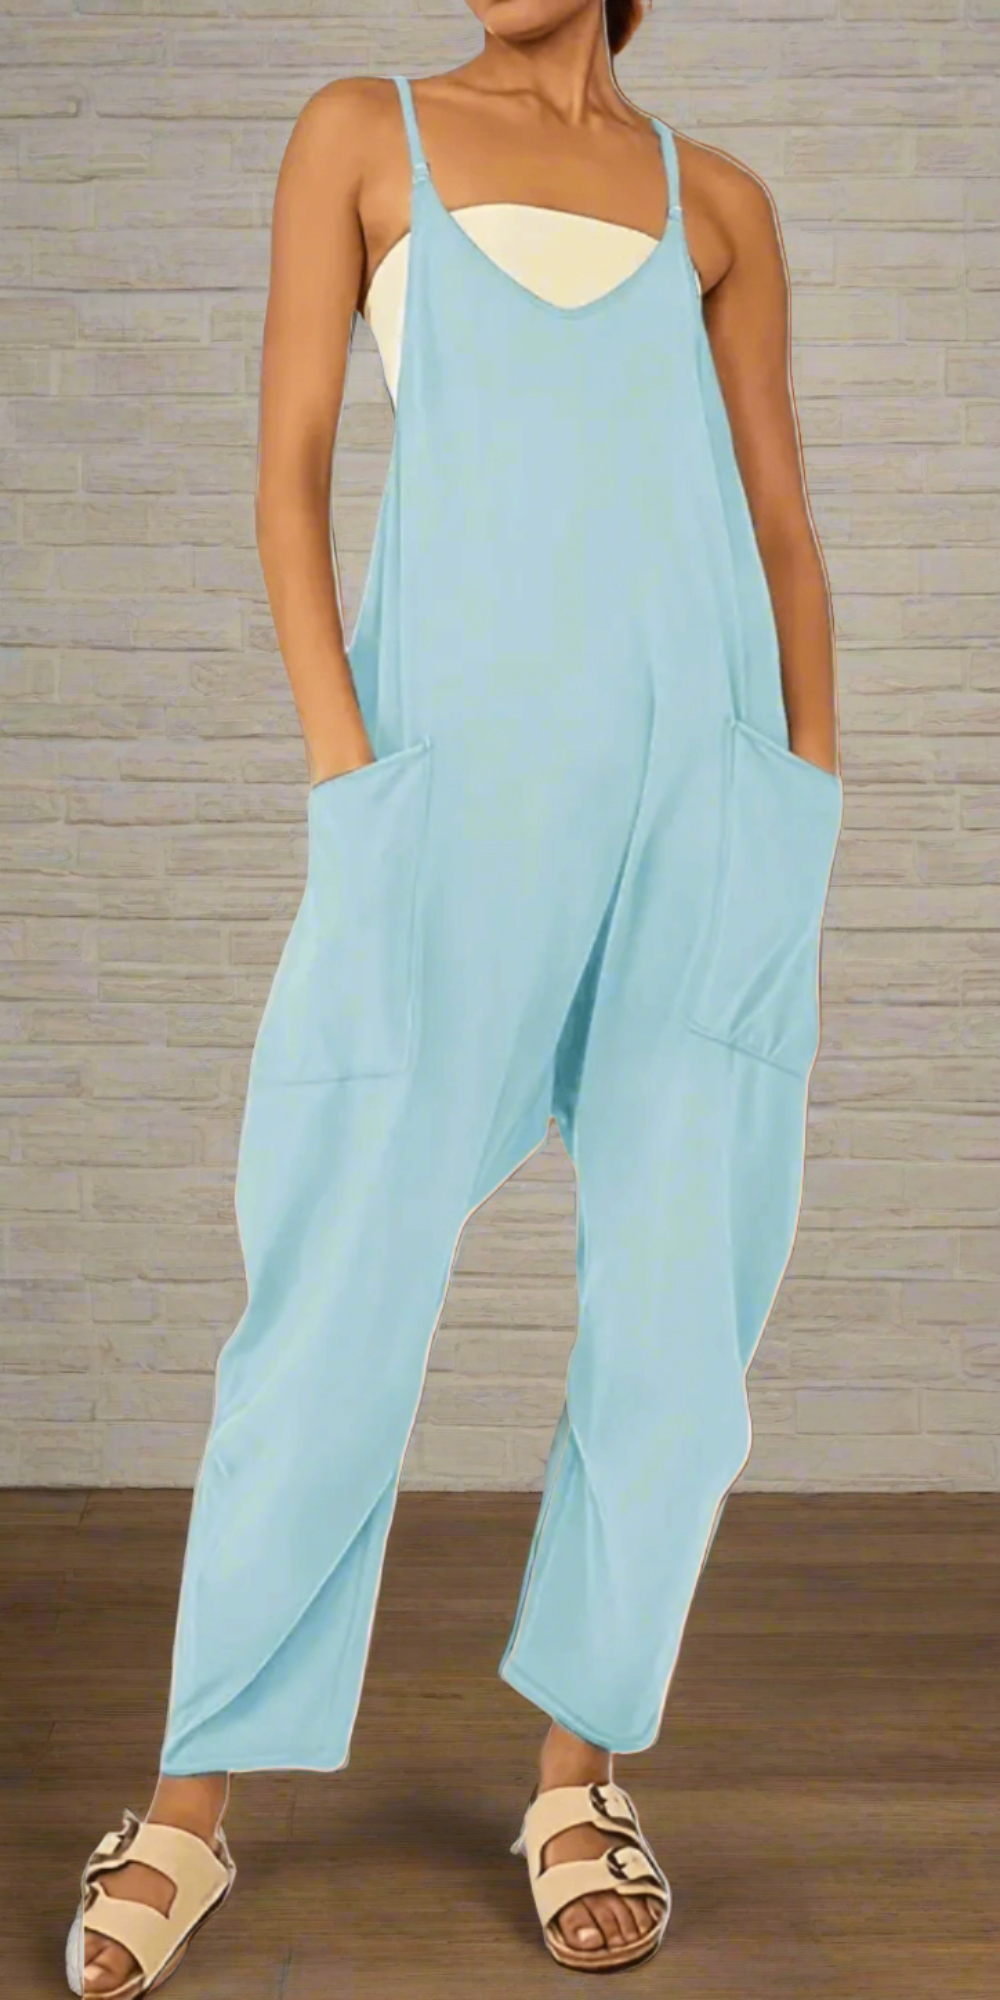 Women's Relaxed Fit Jumpsuit for Ultimate Comfort - Dixie Hike & Style